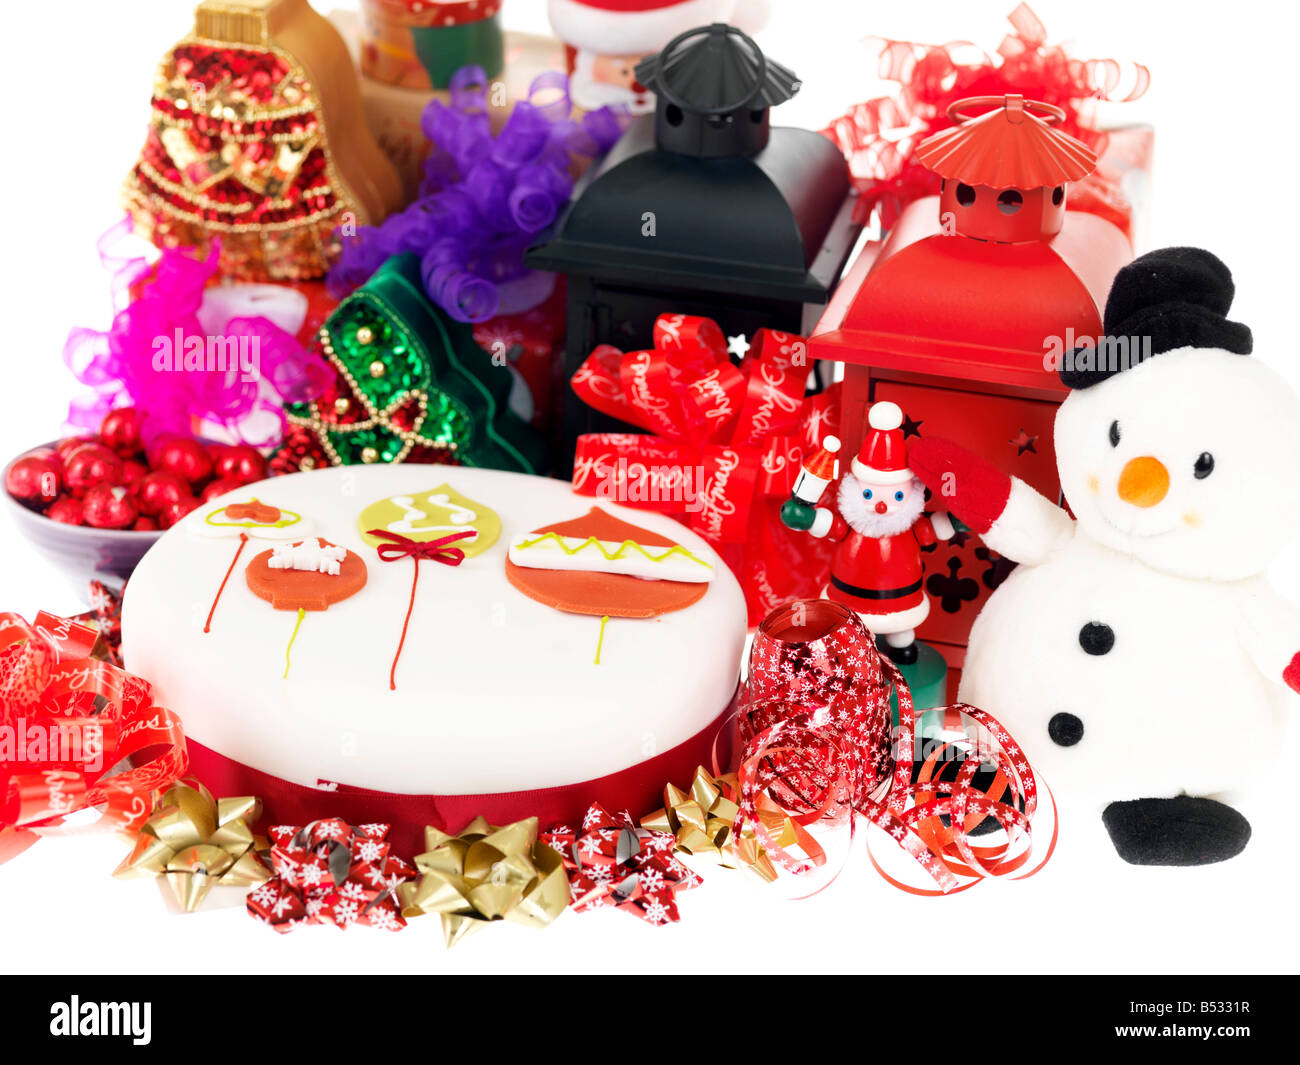 Decorative Iced Festive Christmas Cake, Colourful Seasonal Setting, With No People, Background Of Colour Lanterns Snowman Ribbons And Xmas Decorations Stock Photo